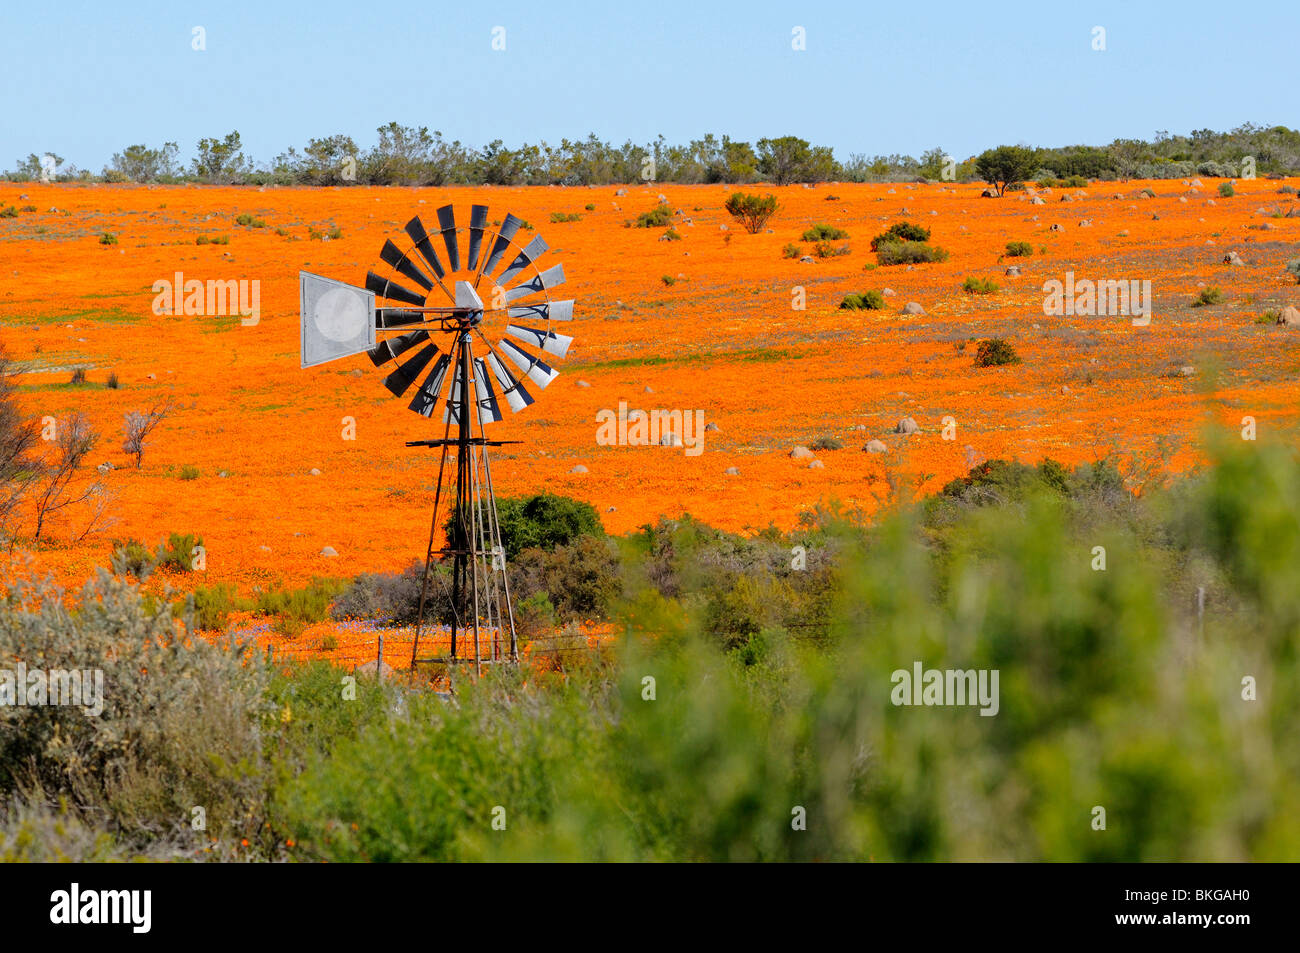 Carpet of spring flowers in Skilpad Nature Reserve near Kamieskroon with traditional windmill, Namaqualand, South Africa Stock Photo